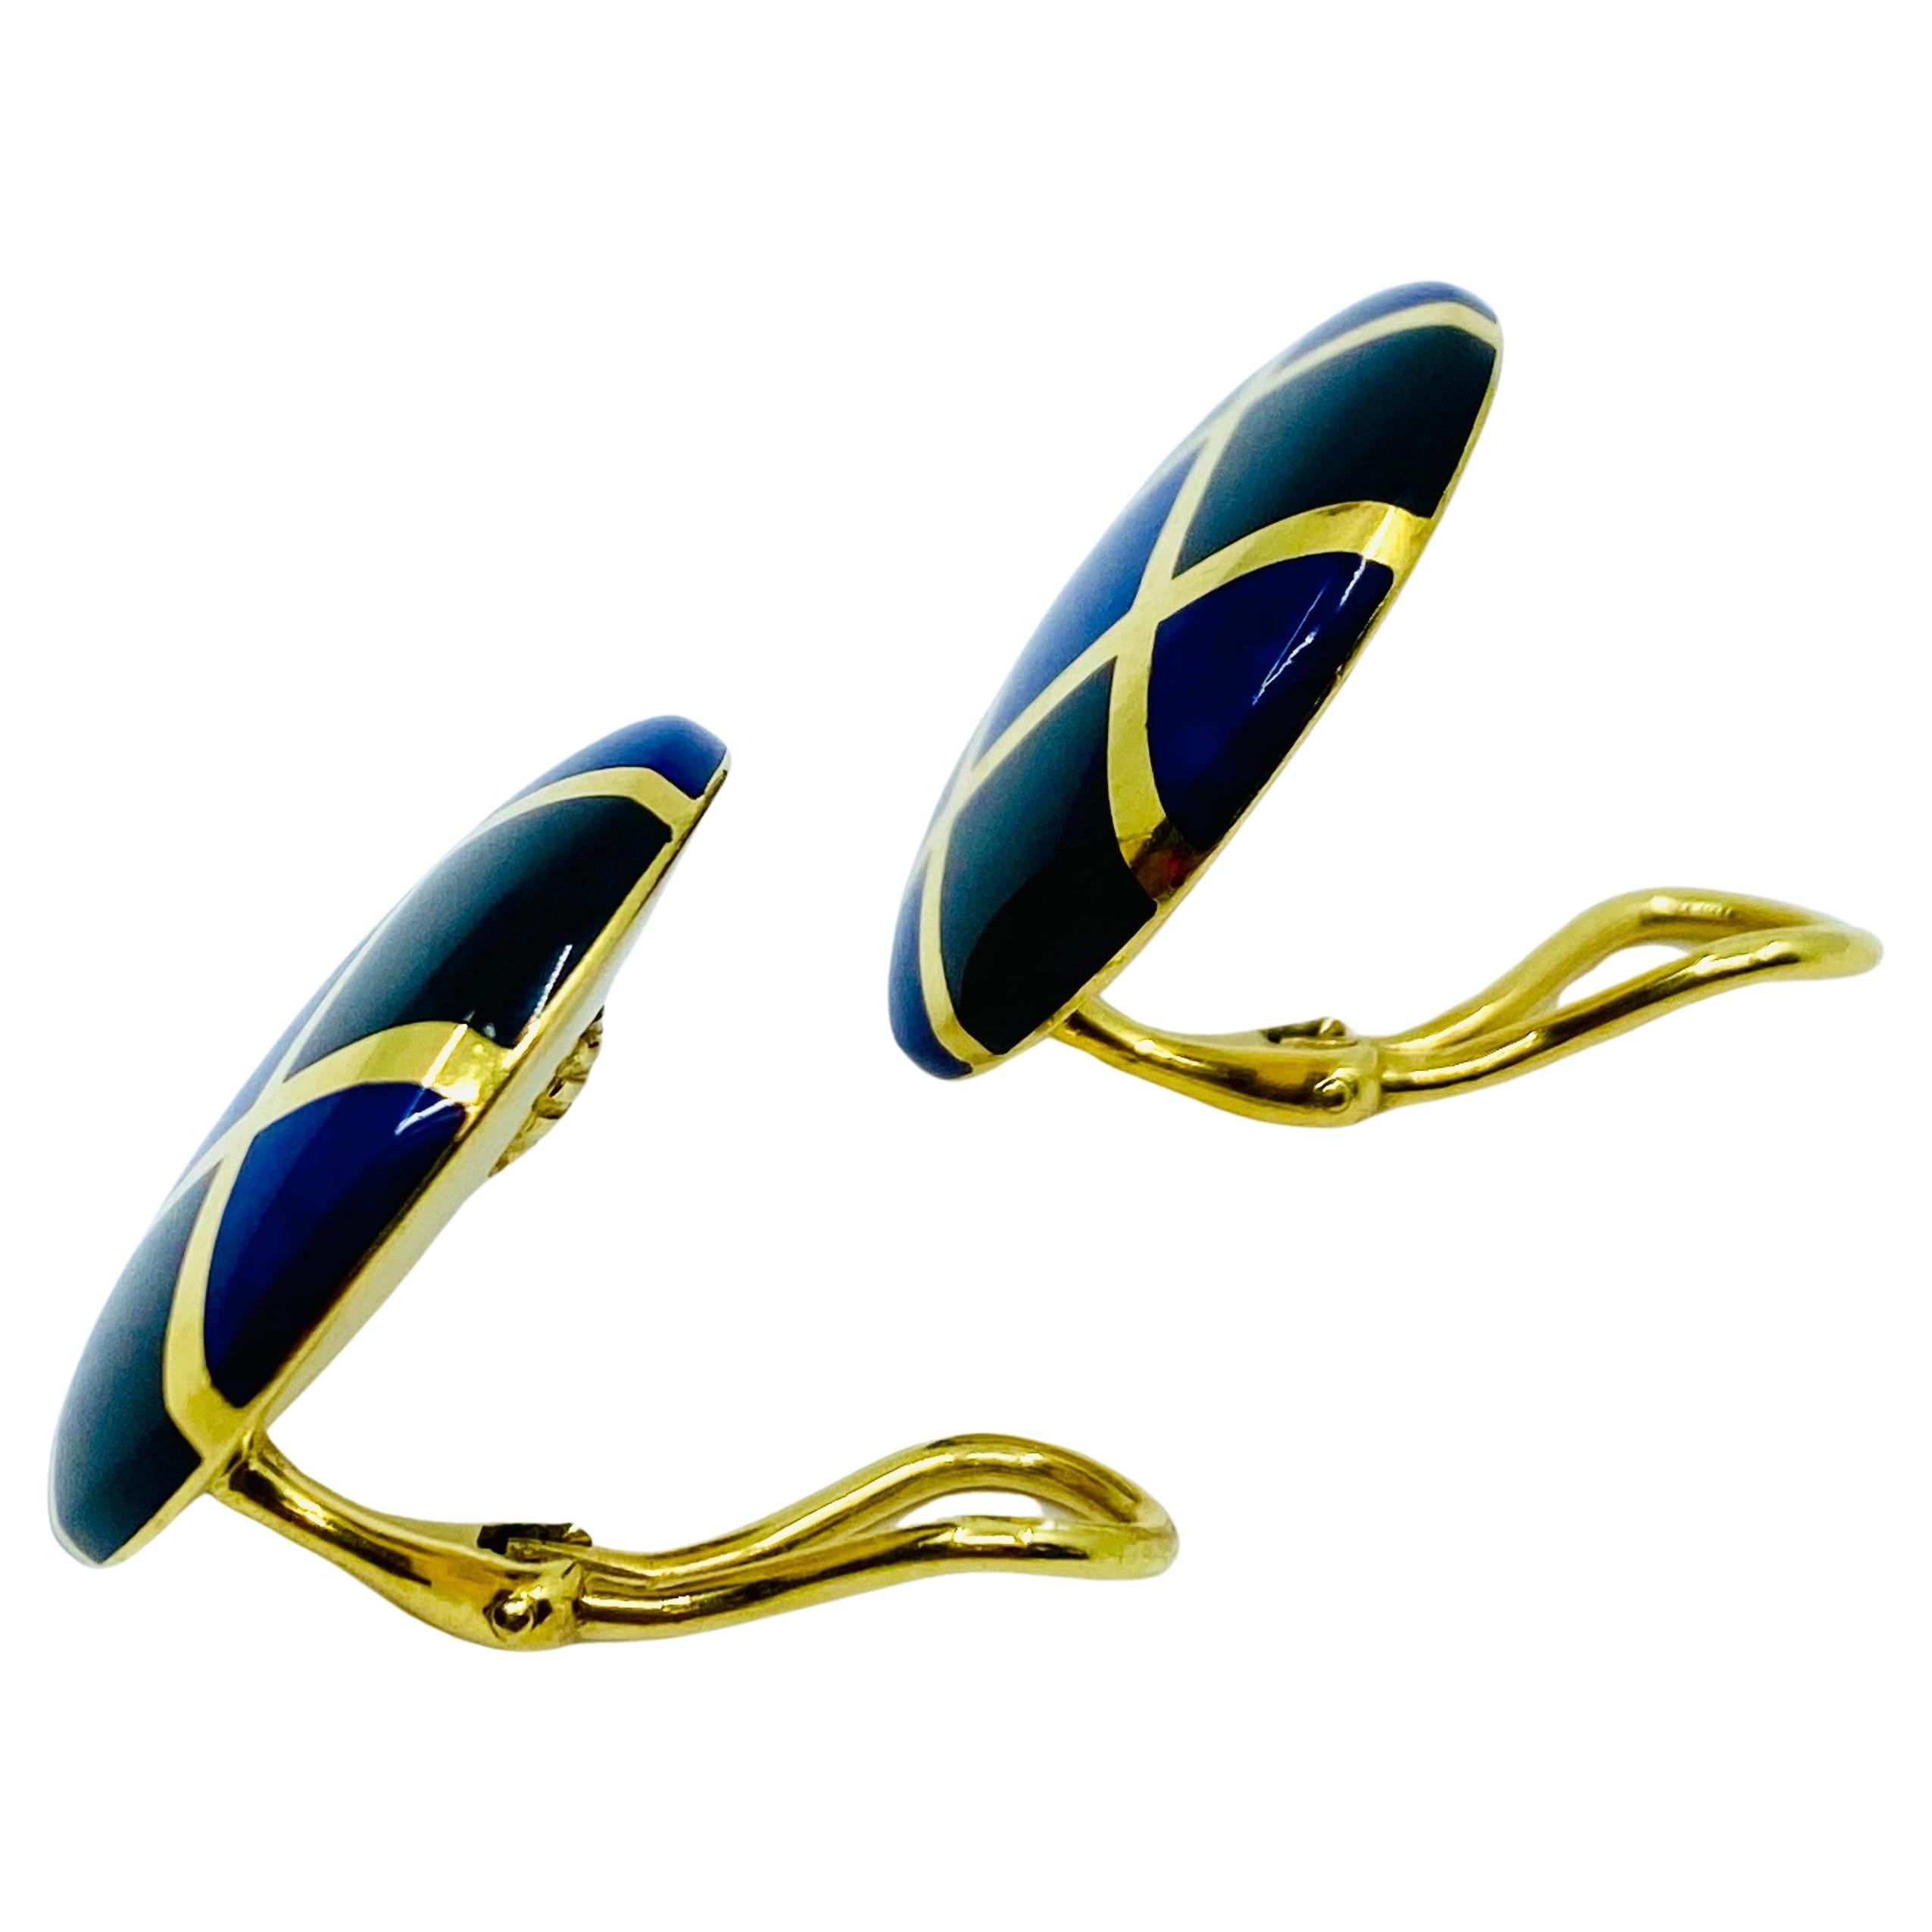 Tiffany & Co. Angela Cummings Enamel Earrings 18k Gold In Excellent Condition For Sale In Beverly Hills, CA